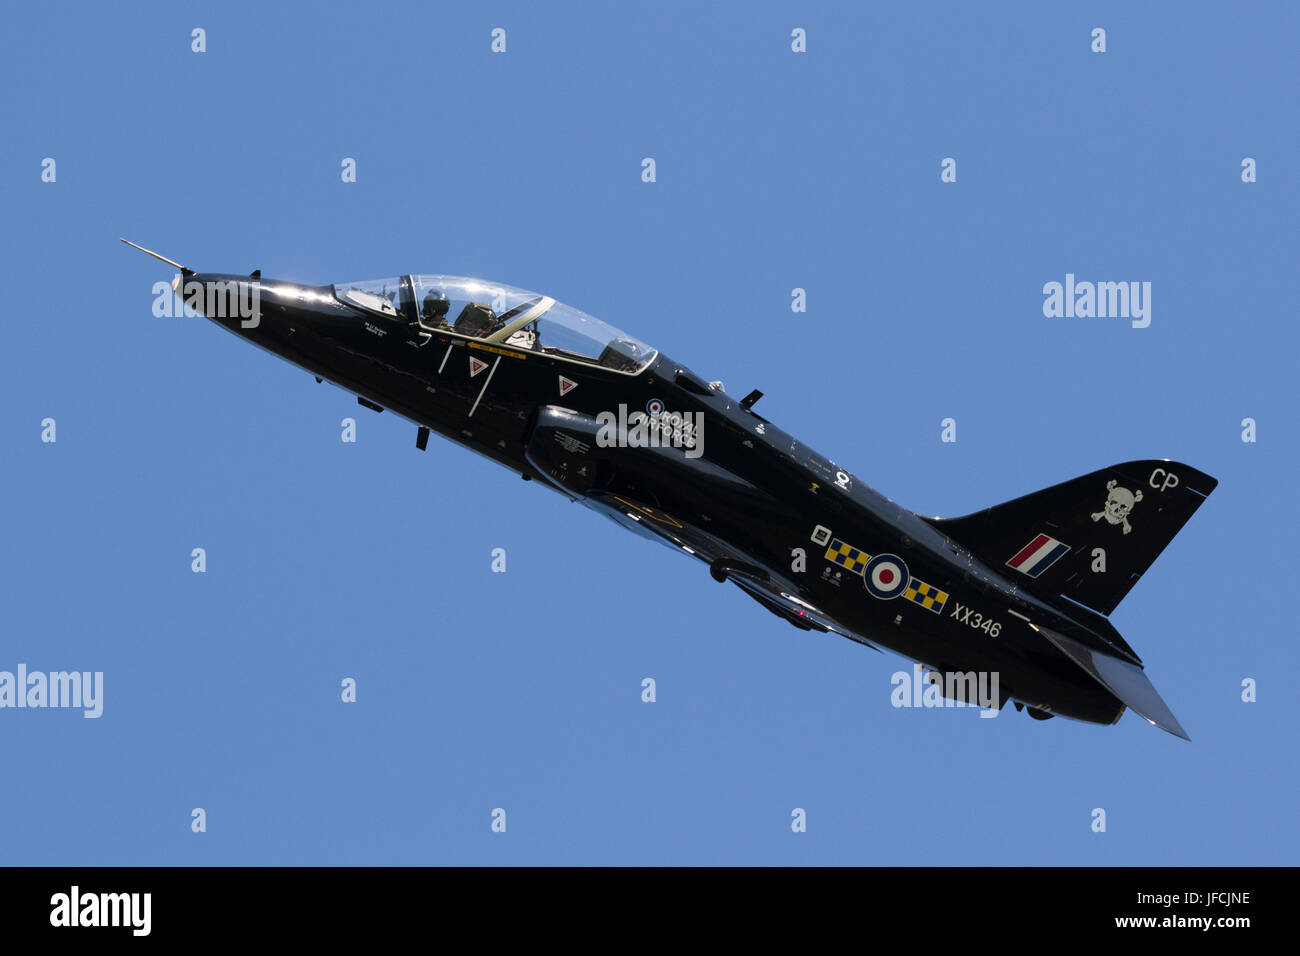 FLORENNES, BELGIUM - JUN 15, 2017: Royal Air Force BAe Hawk T1 trainer jet flying by over Florennes Airbase. Stock Photo